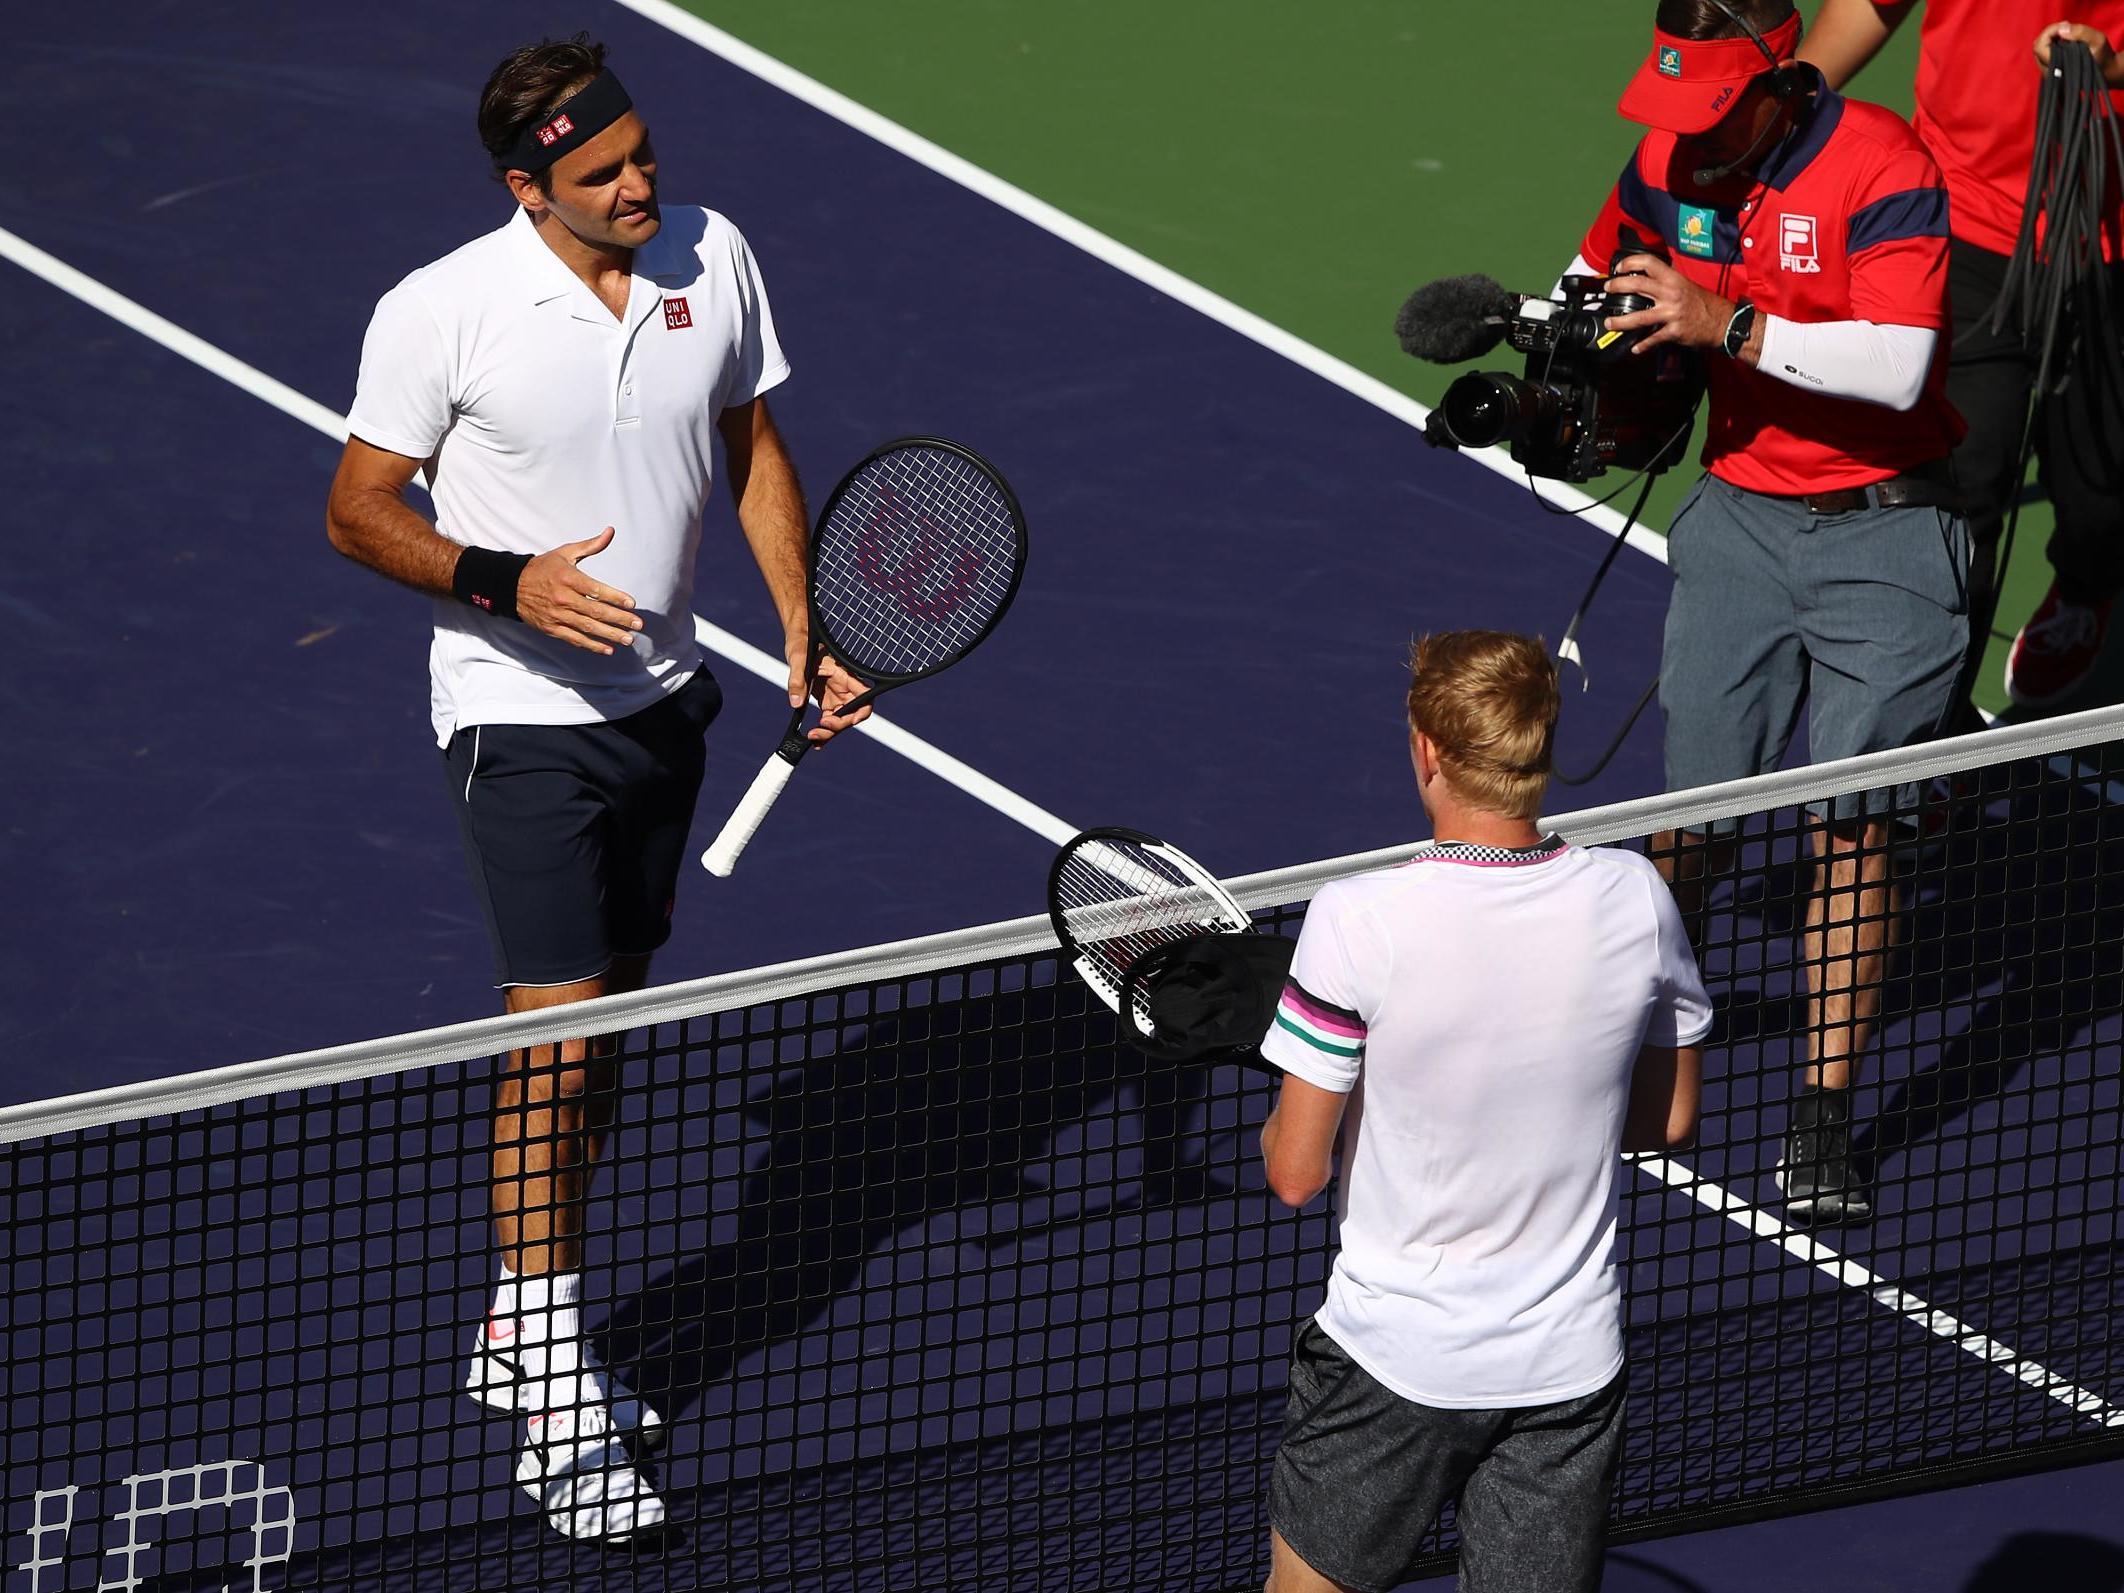 Roger Federer shakes hands at the net after his straight sets victory against Kyle Edmund